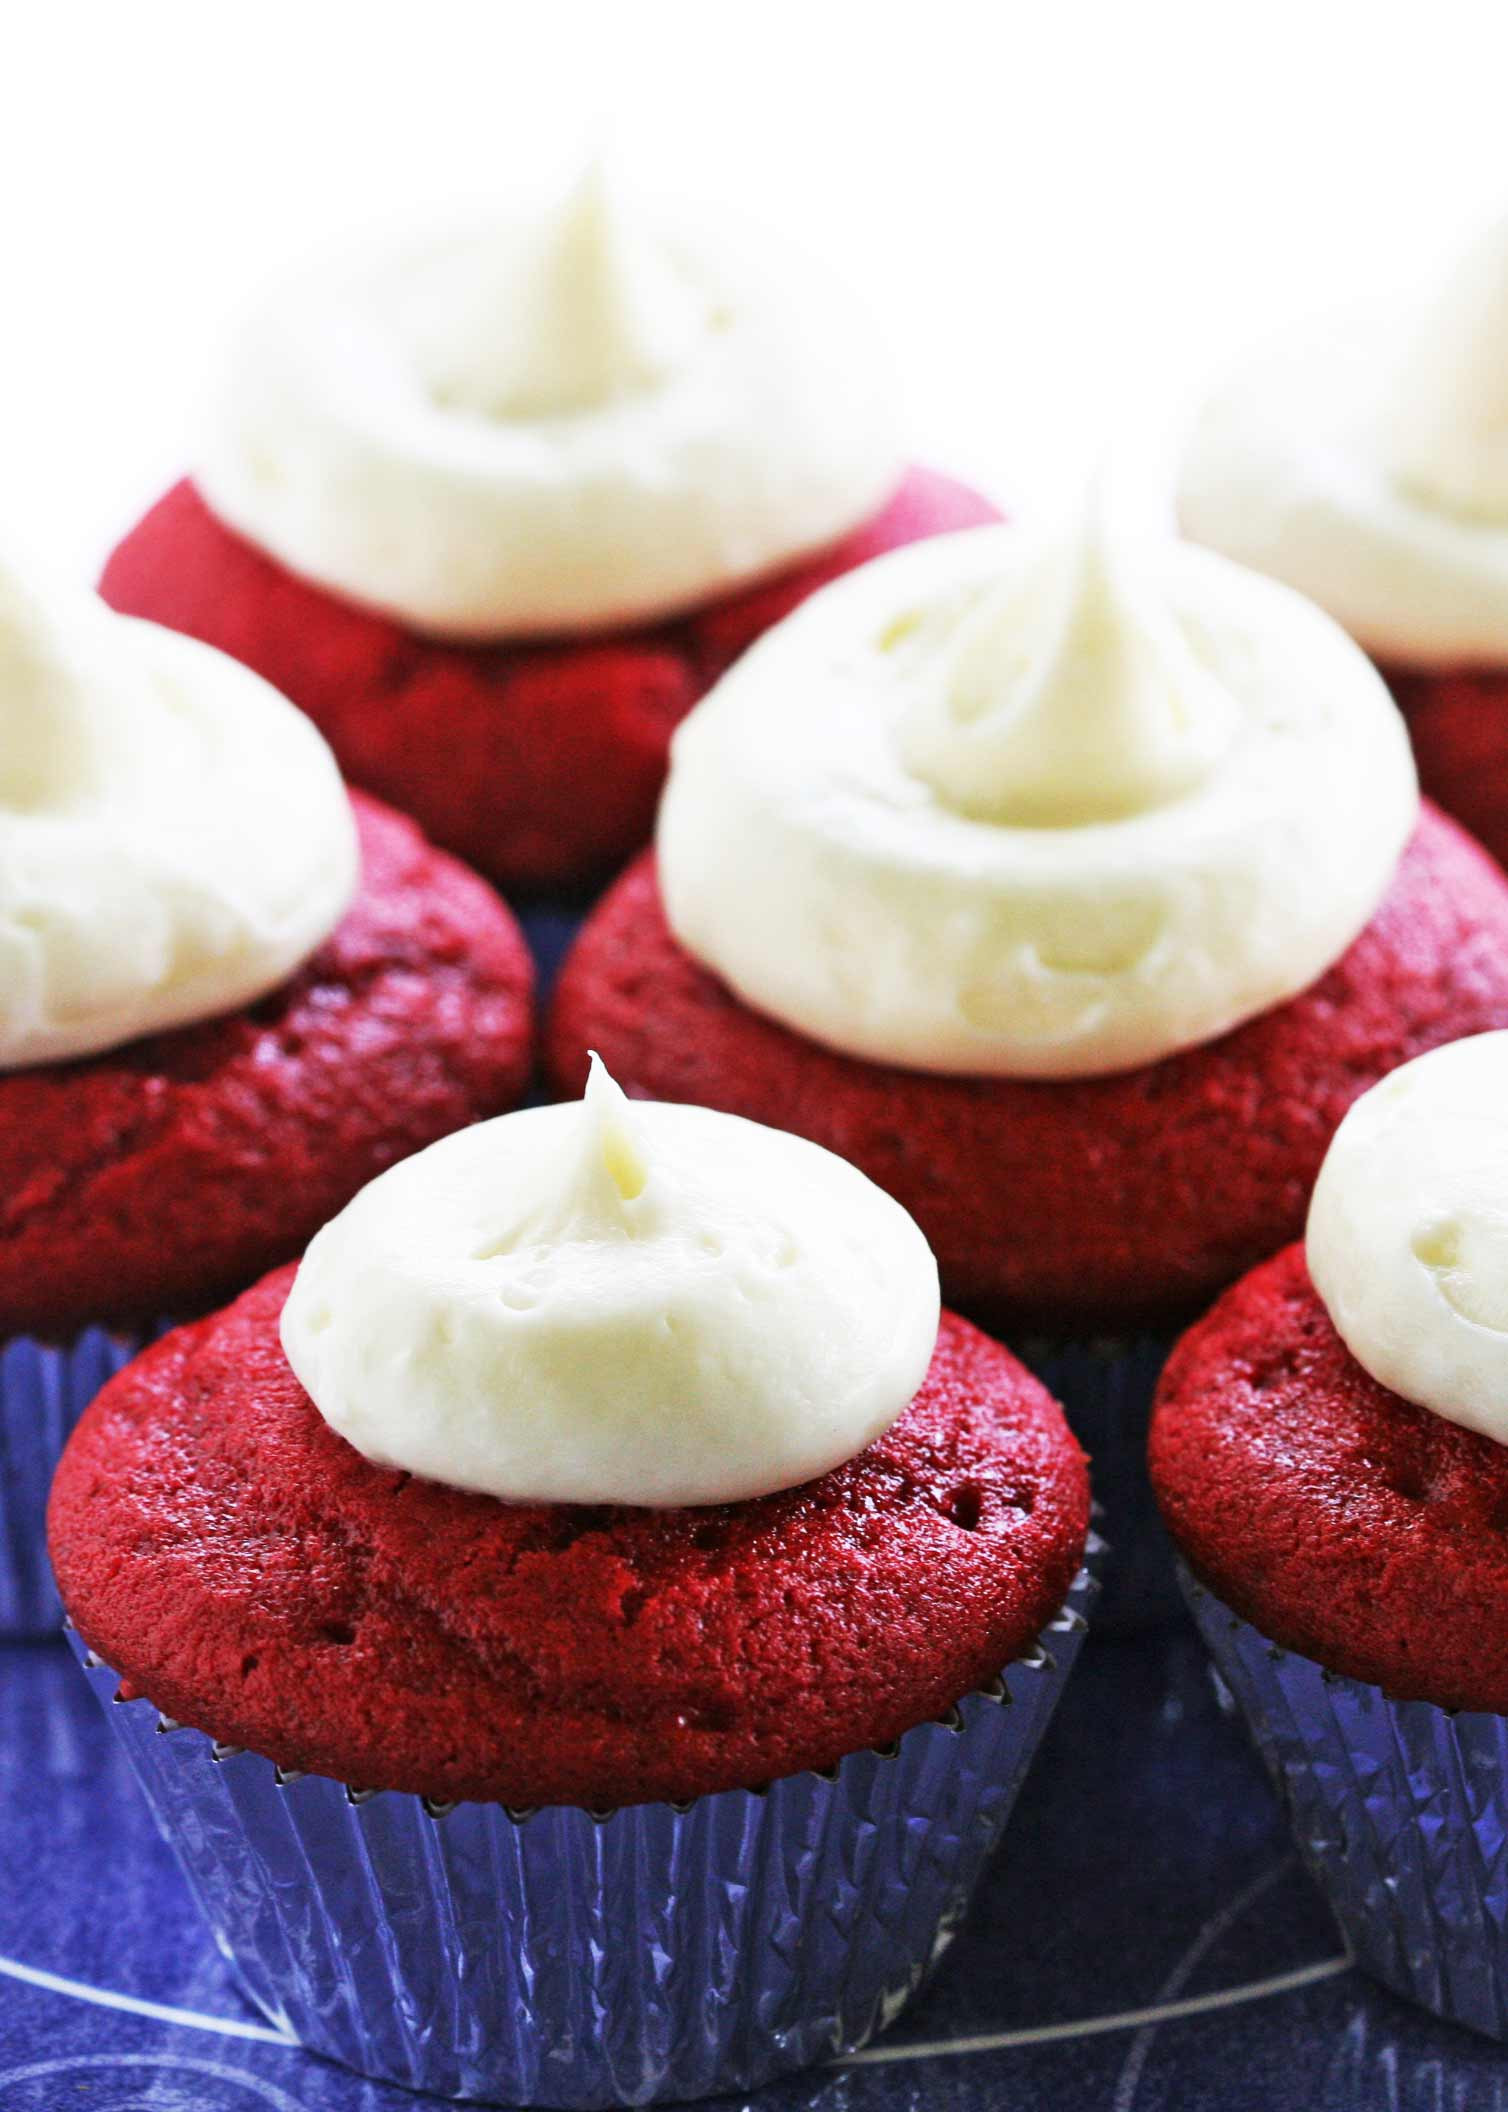 Red Velvet Cupcakes With Cream Cheese Frosting
 Red Velvet Cupcakes with Cream Cheese Frosting Recipe